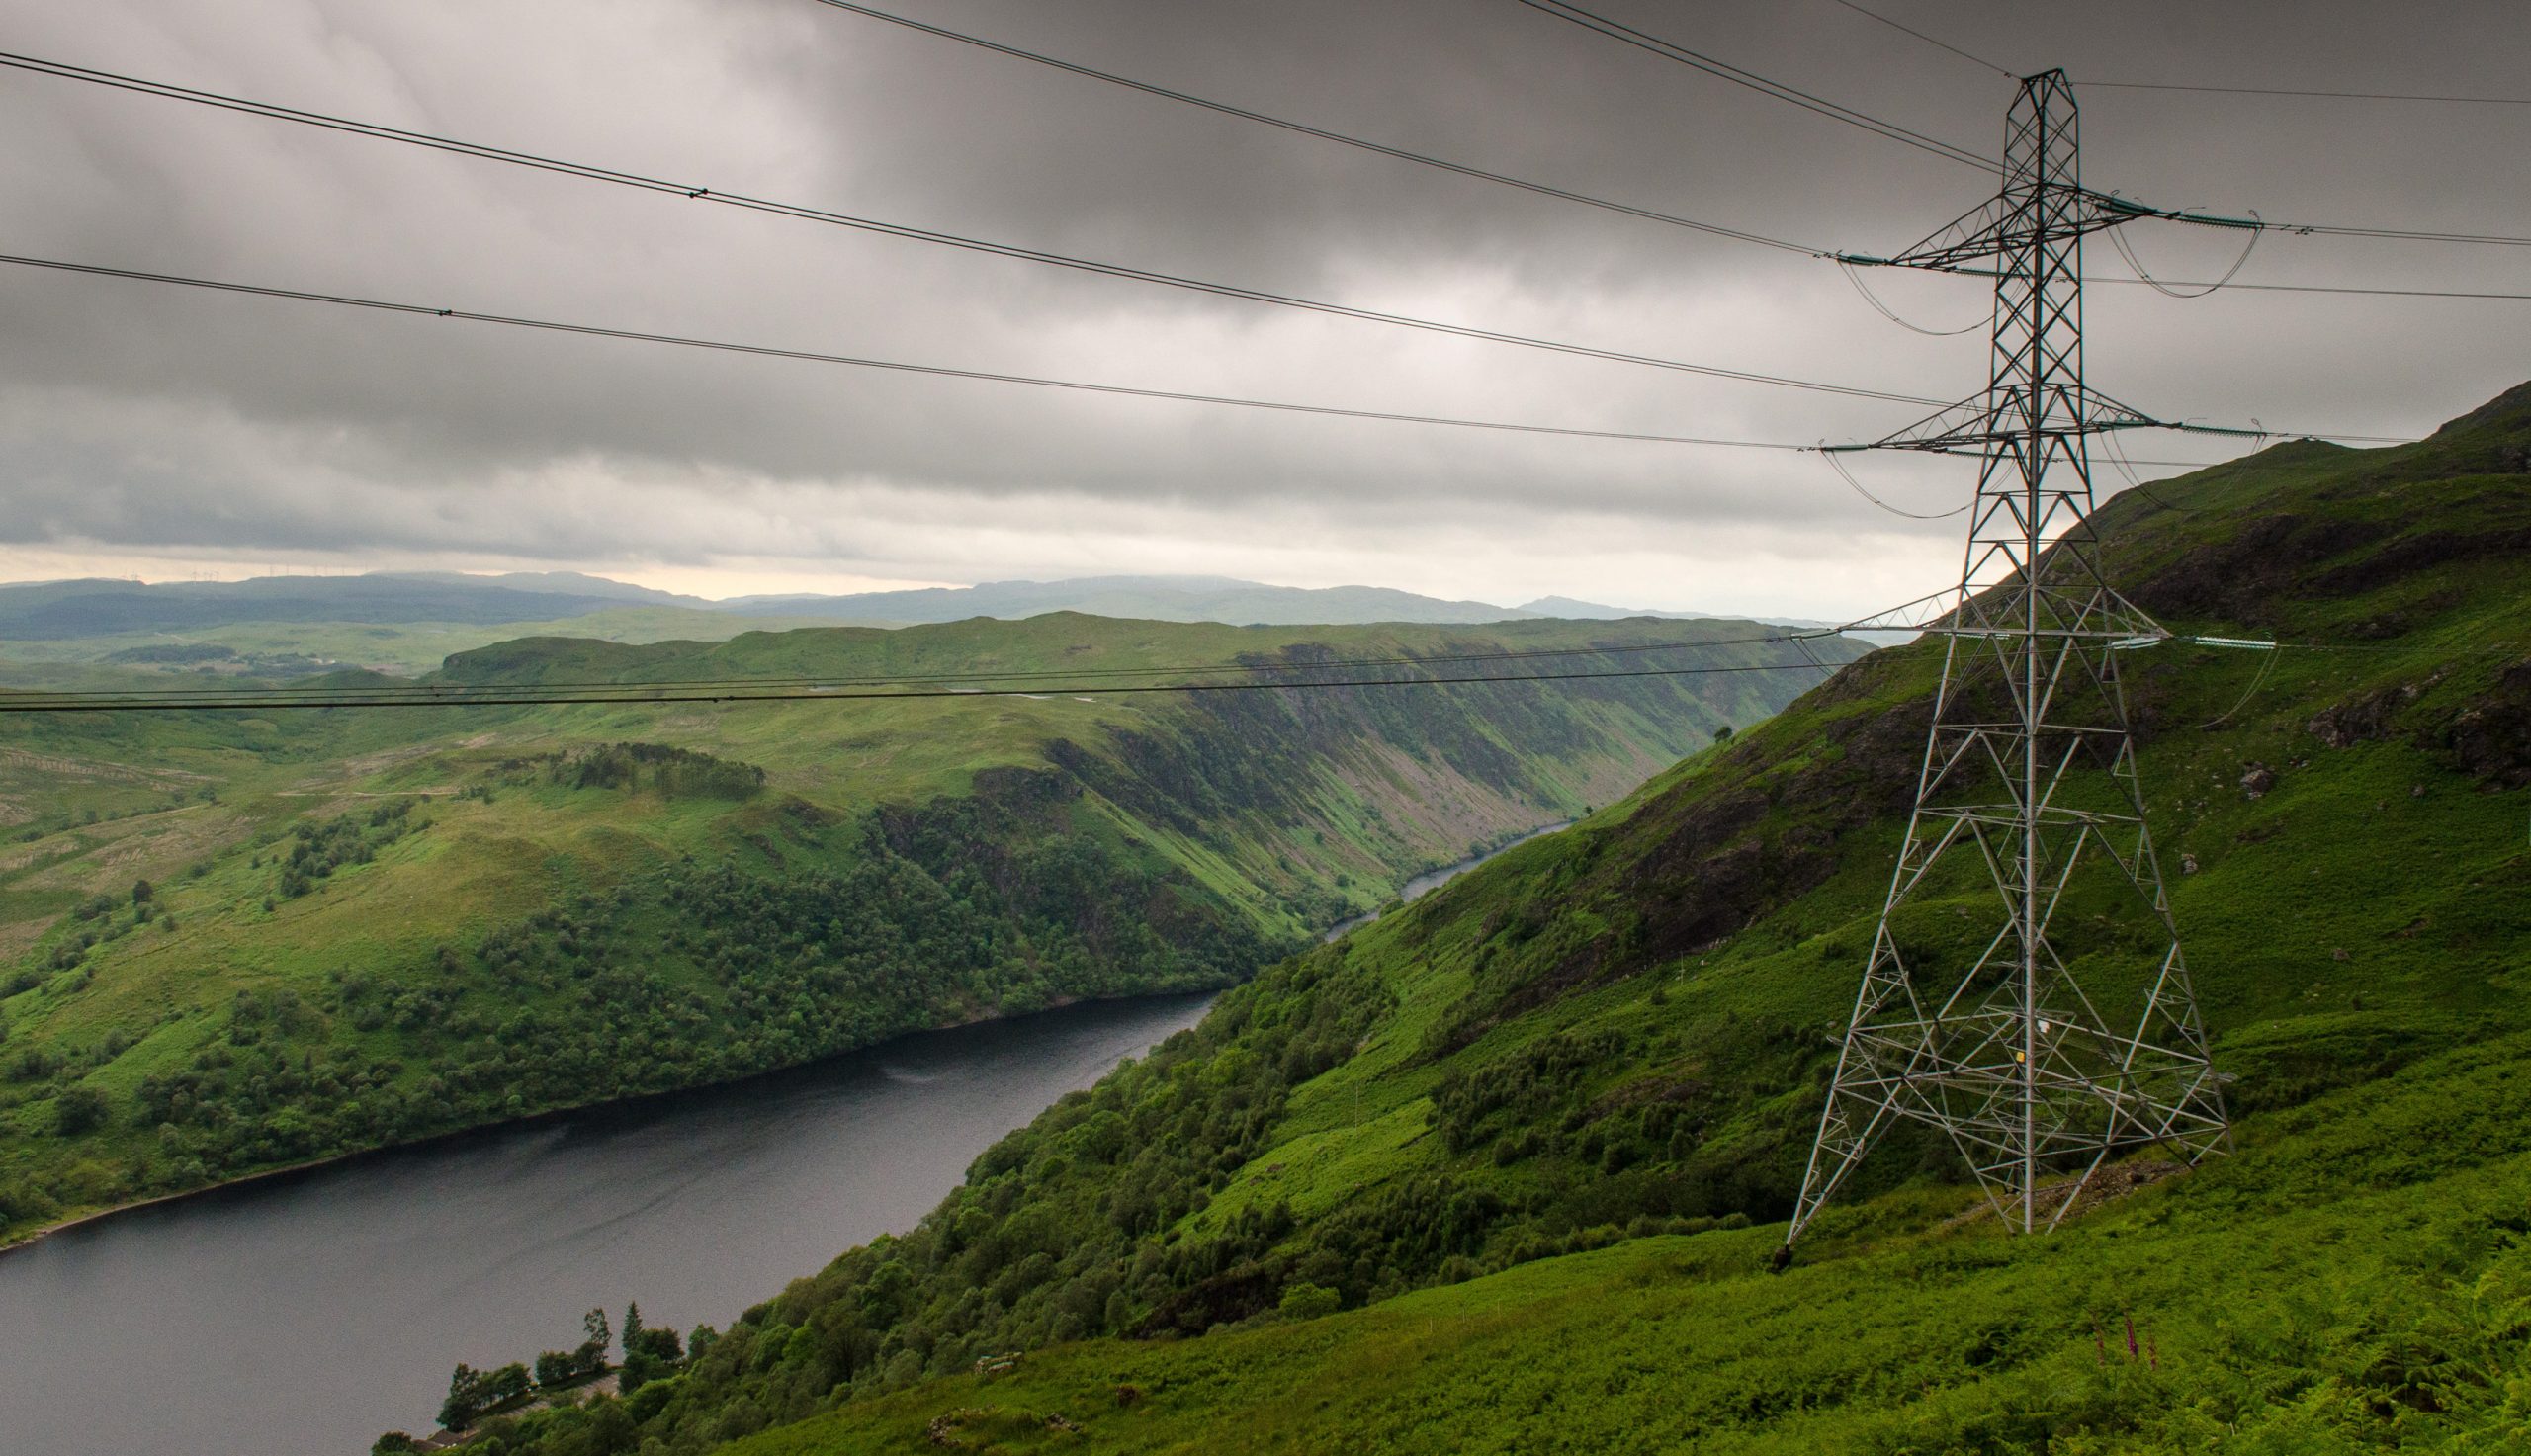 A pylon carries electricity transmission lines from Cruachan Hydroelectric Power Station above Loch Awe in the mountains of the West Highlands of Scotland